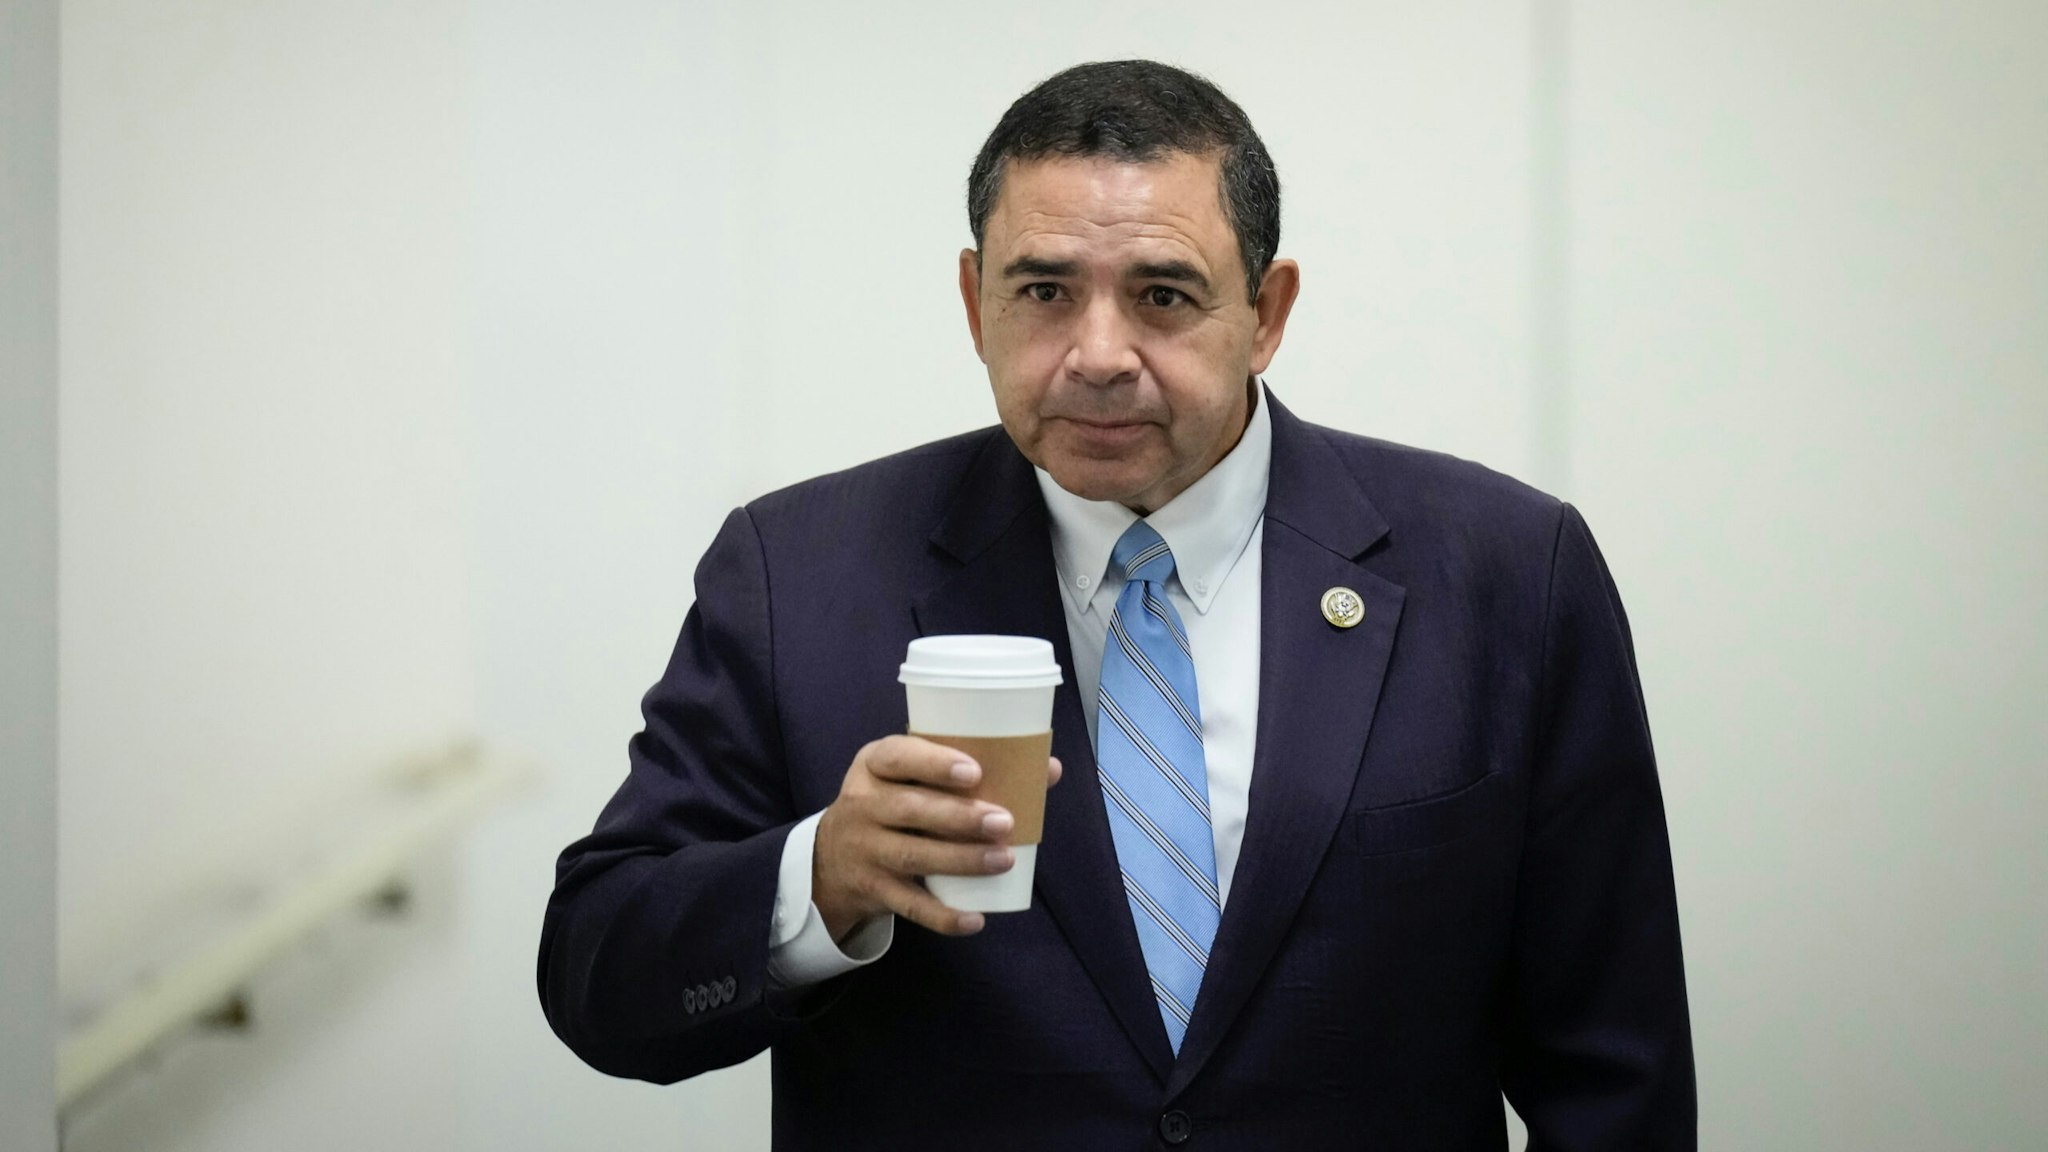 Rep. Henry Cuellar (D-TX) leaves a meeting with House Democrats at the U.S. Capitol November 17, 2022 in Washington, DC.